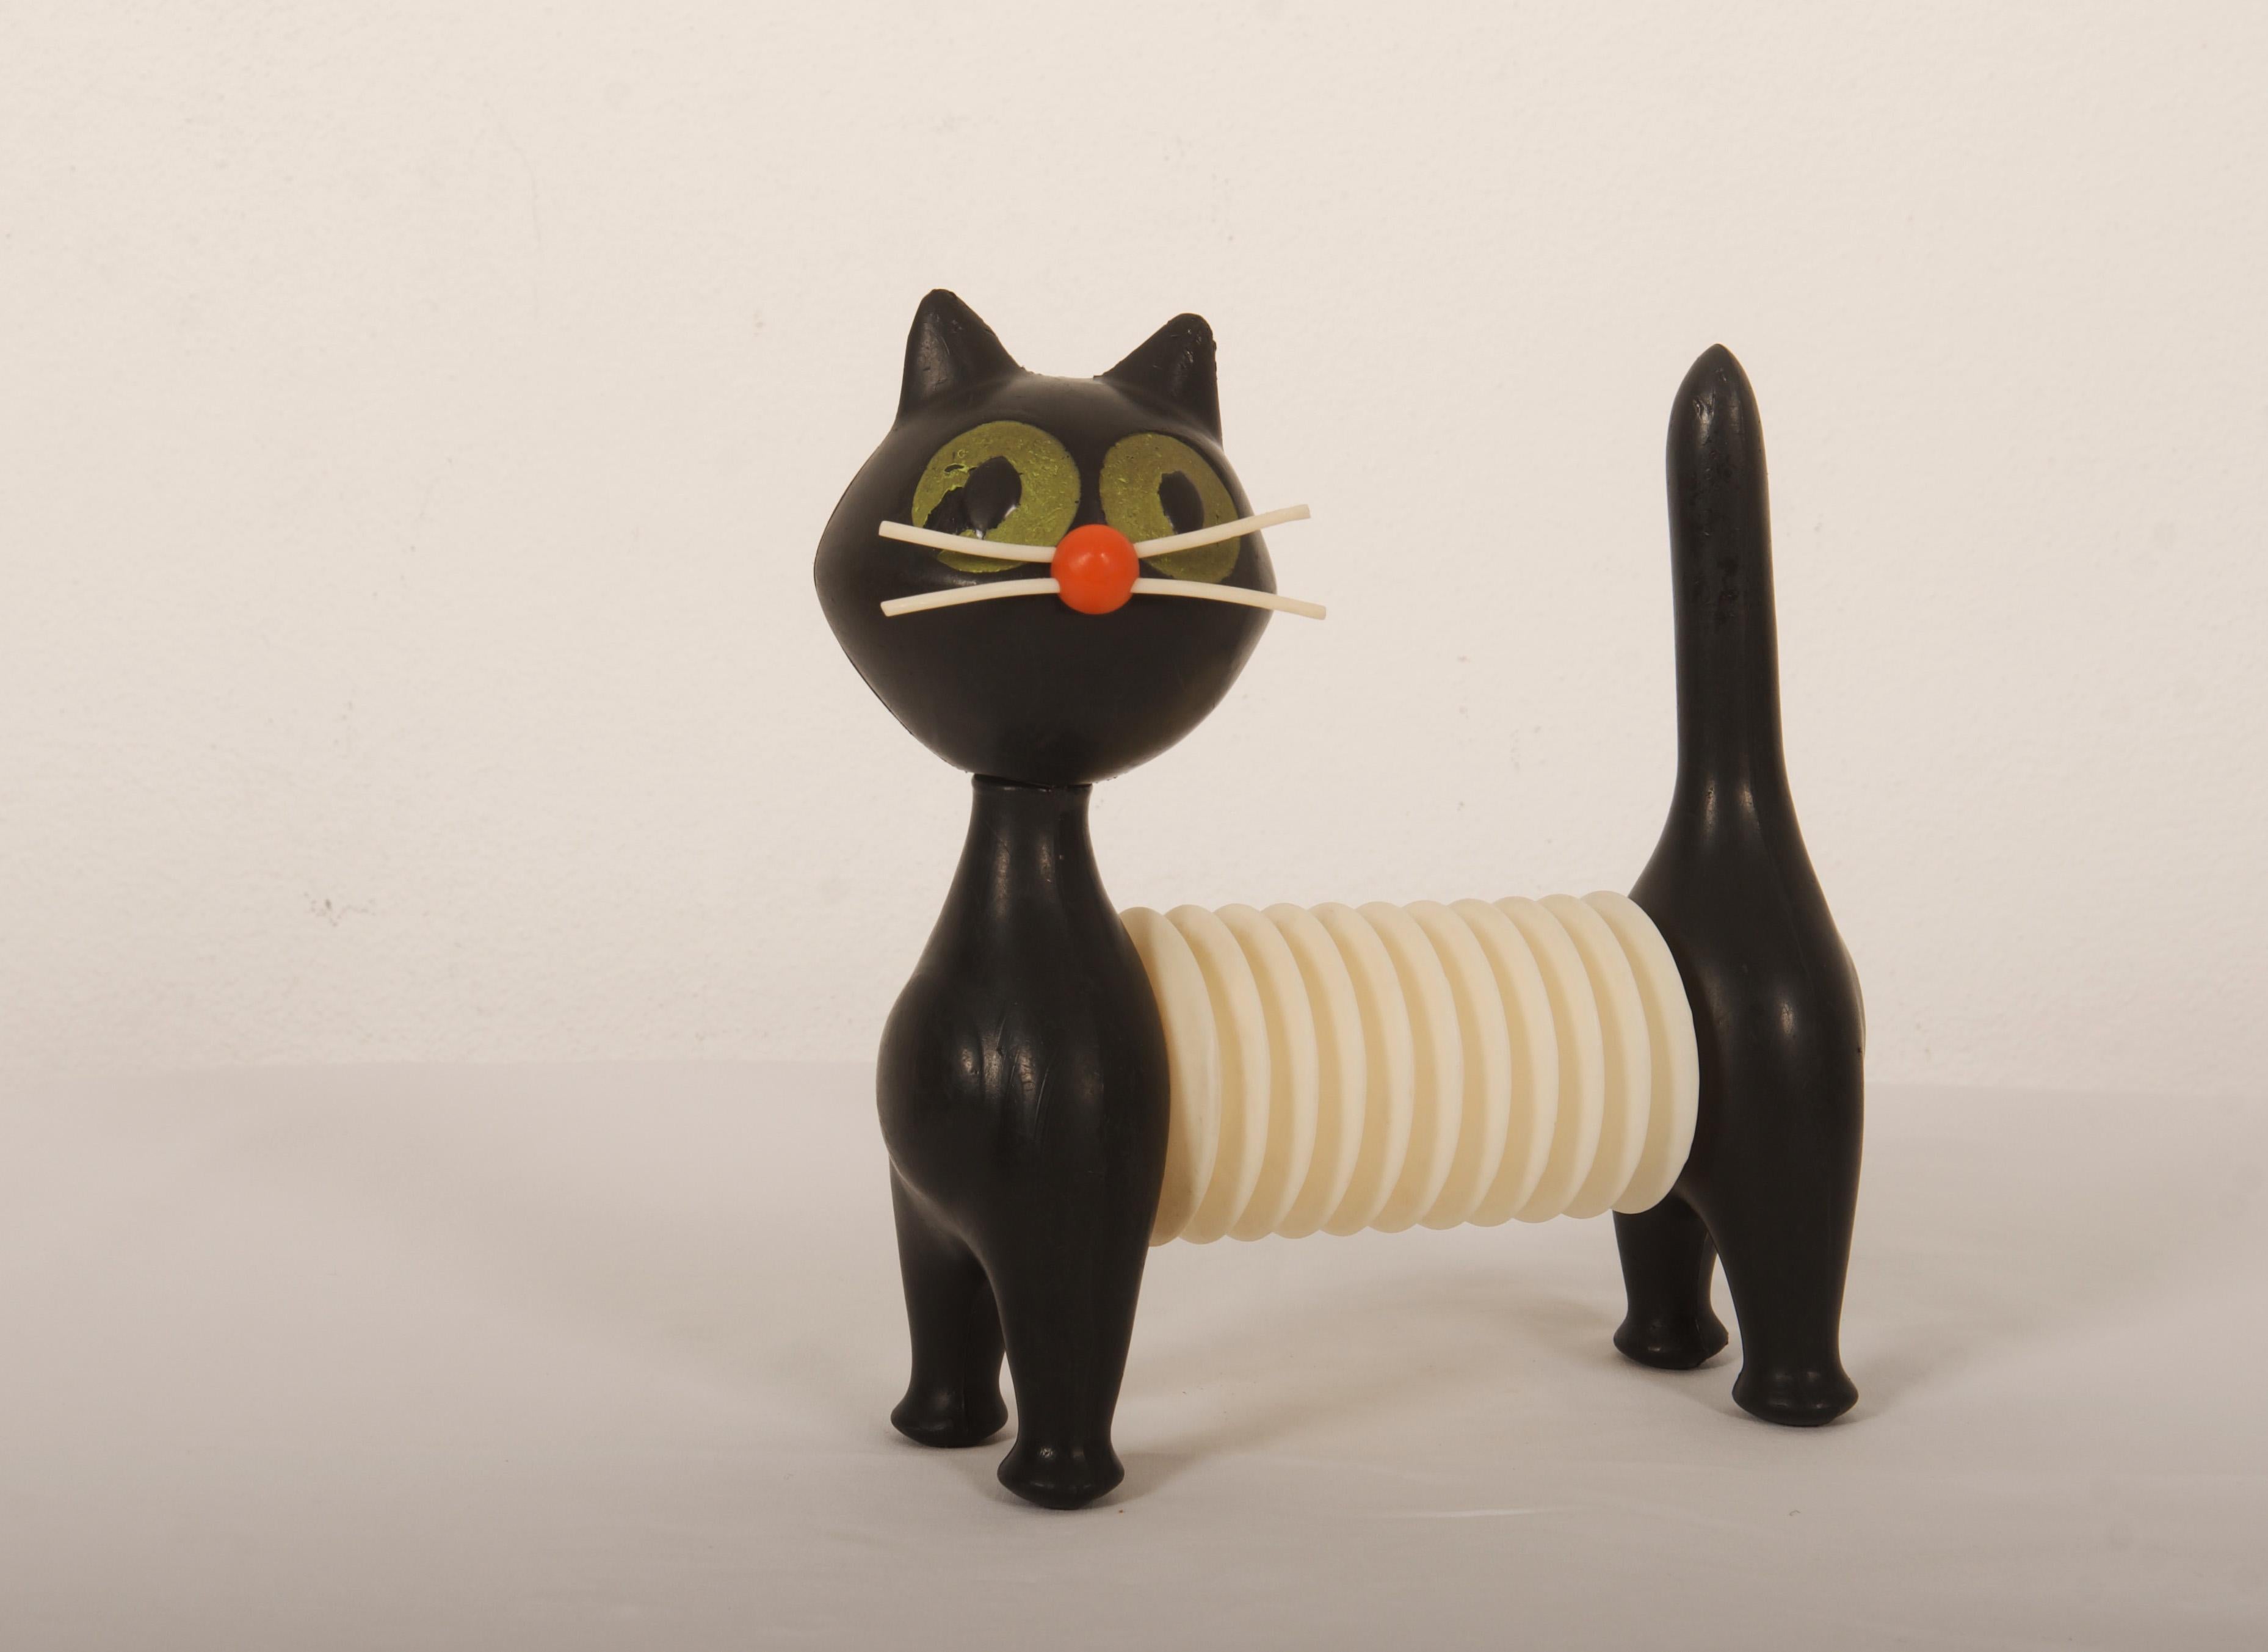 Libuse Niklova for Fatra Napajedla, Czechoslovakia, four-legged construction in the shape of an abstract cat made of different colored plastic (black, white, orange and green). Marked with manufacturer's mark. 
Lit.: Czech 100 Desig Icons, p. 46.